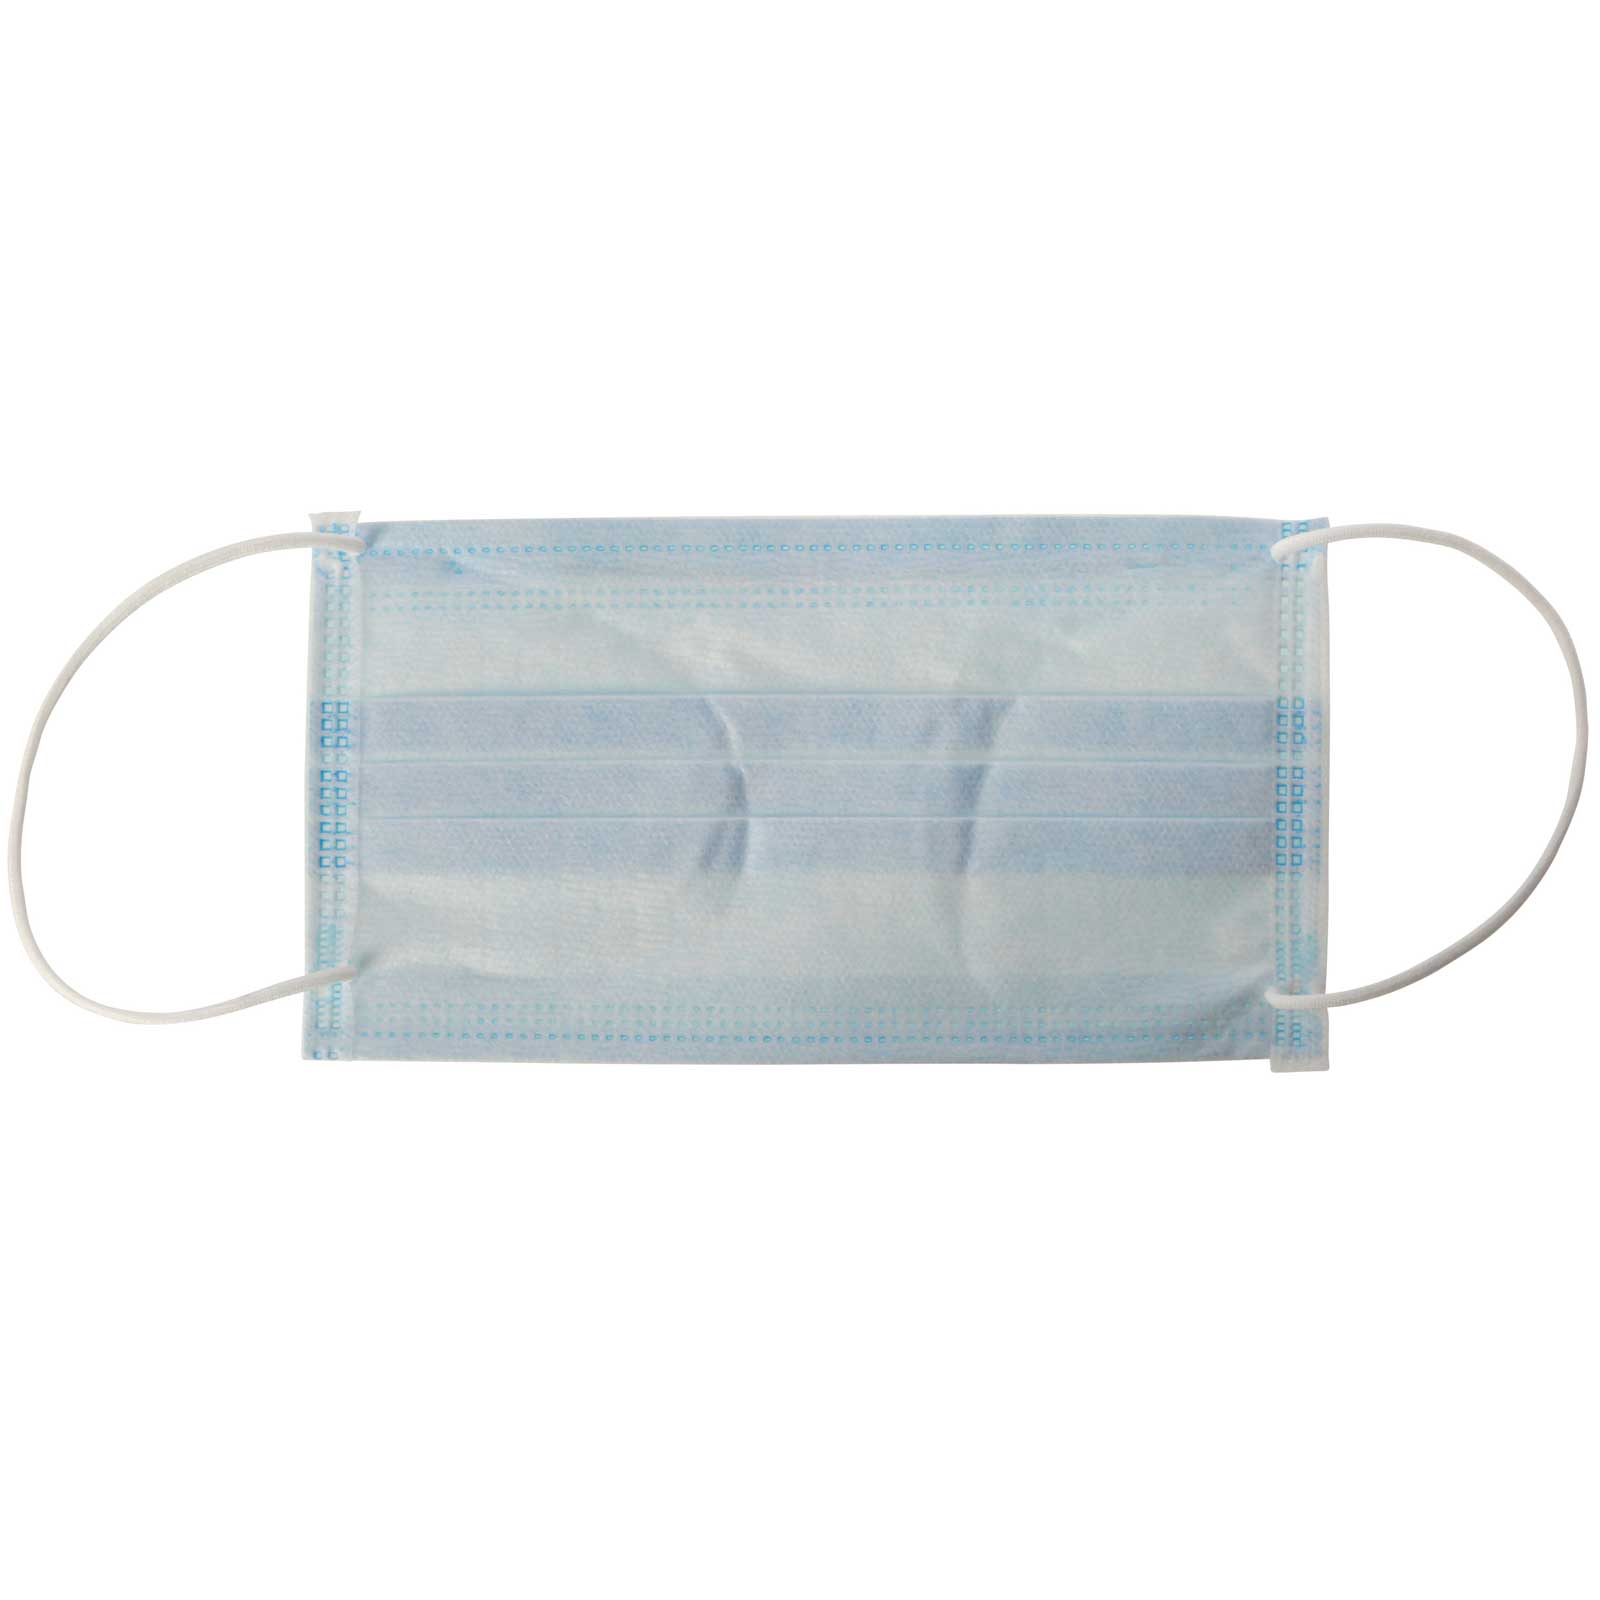 50x Disposable Face Mask